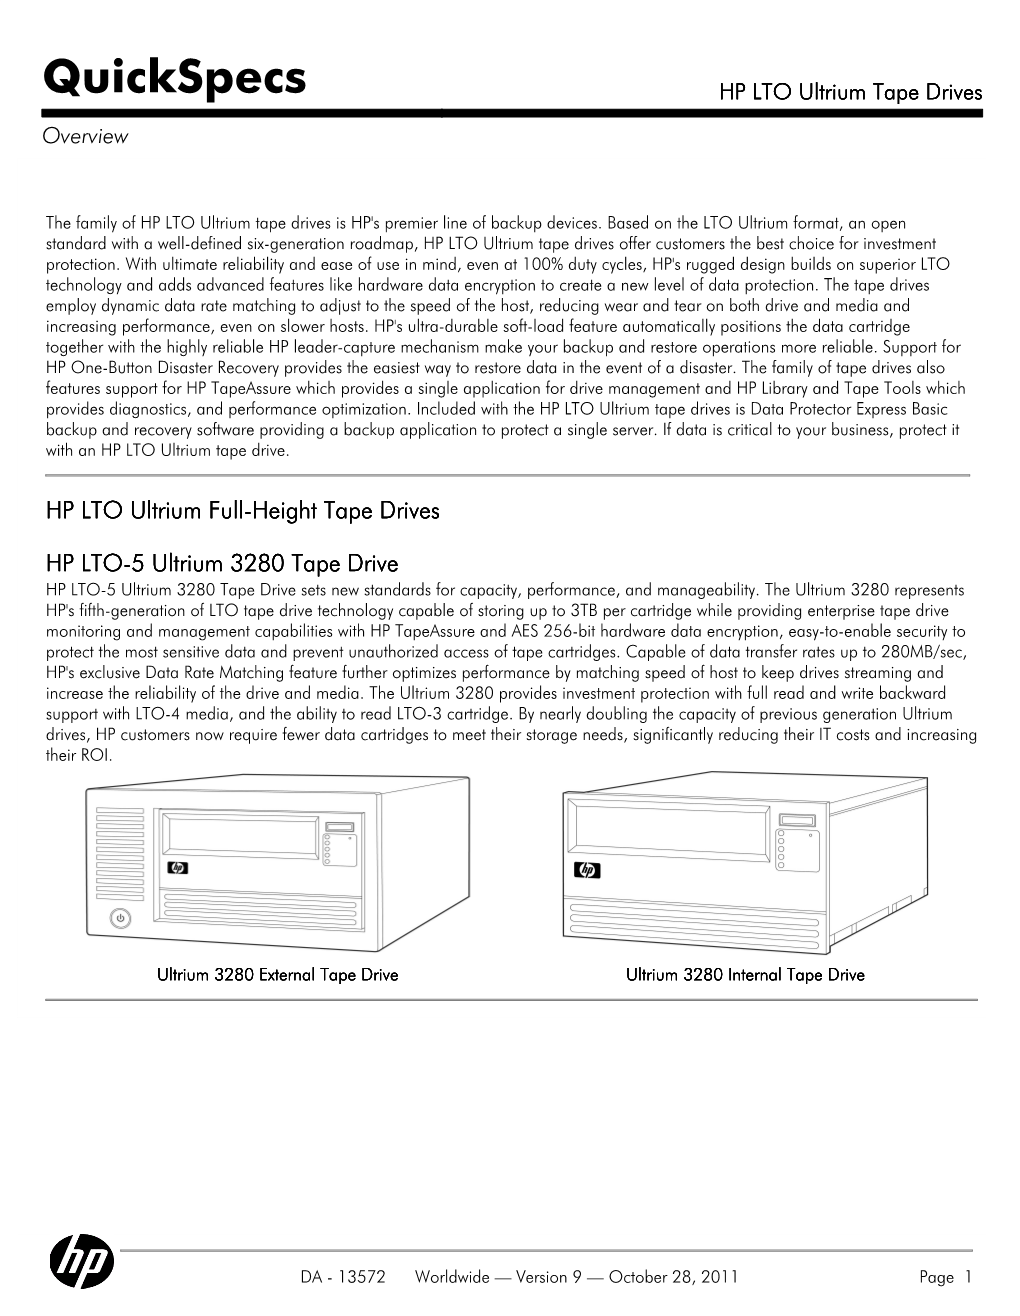 HP LTO Ultrium Tape Drives Overview